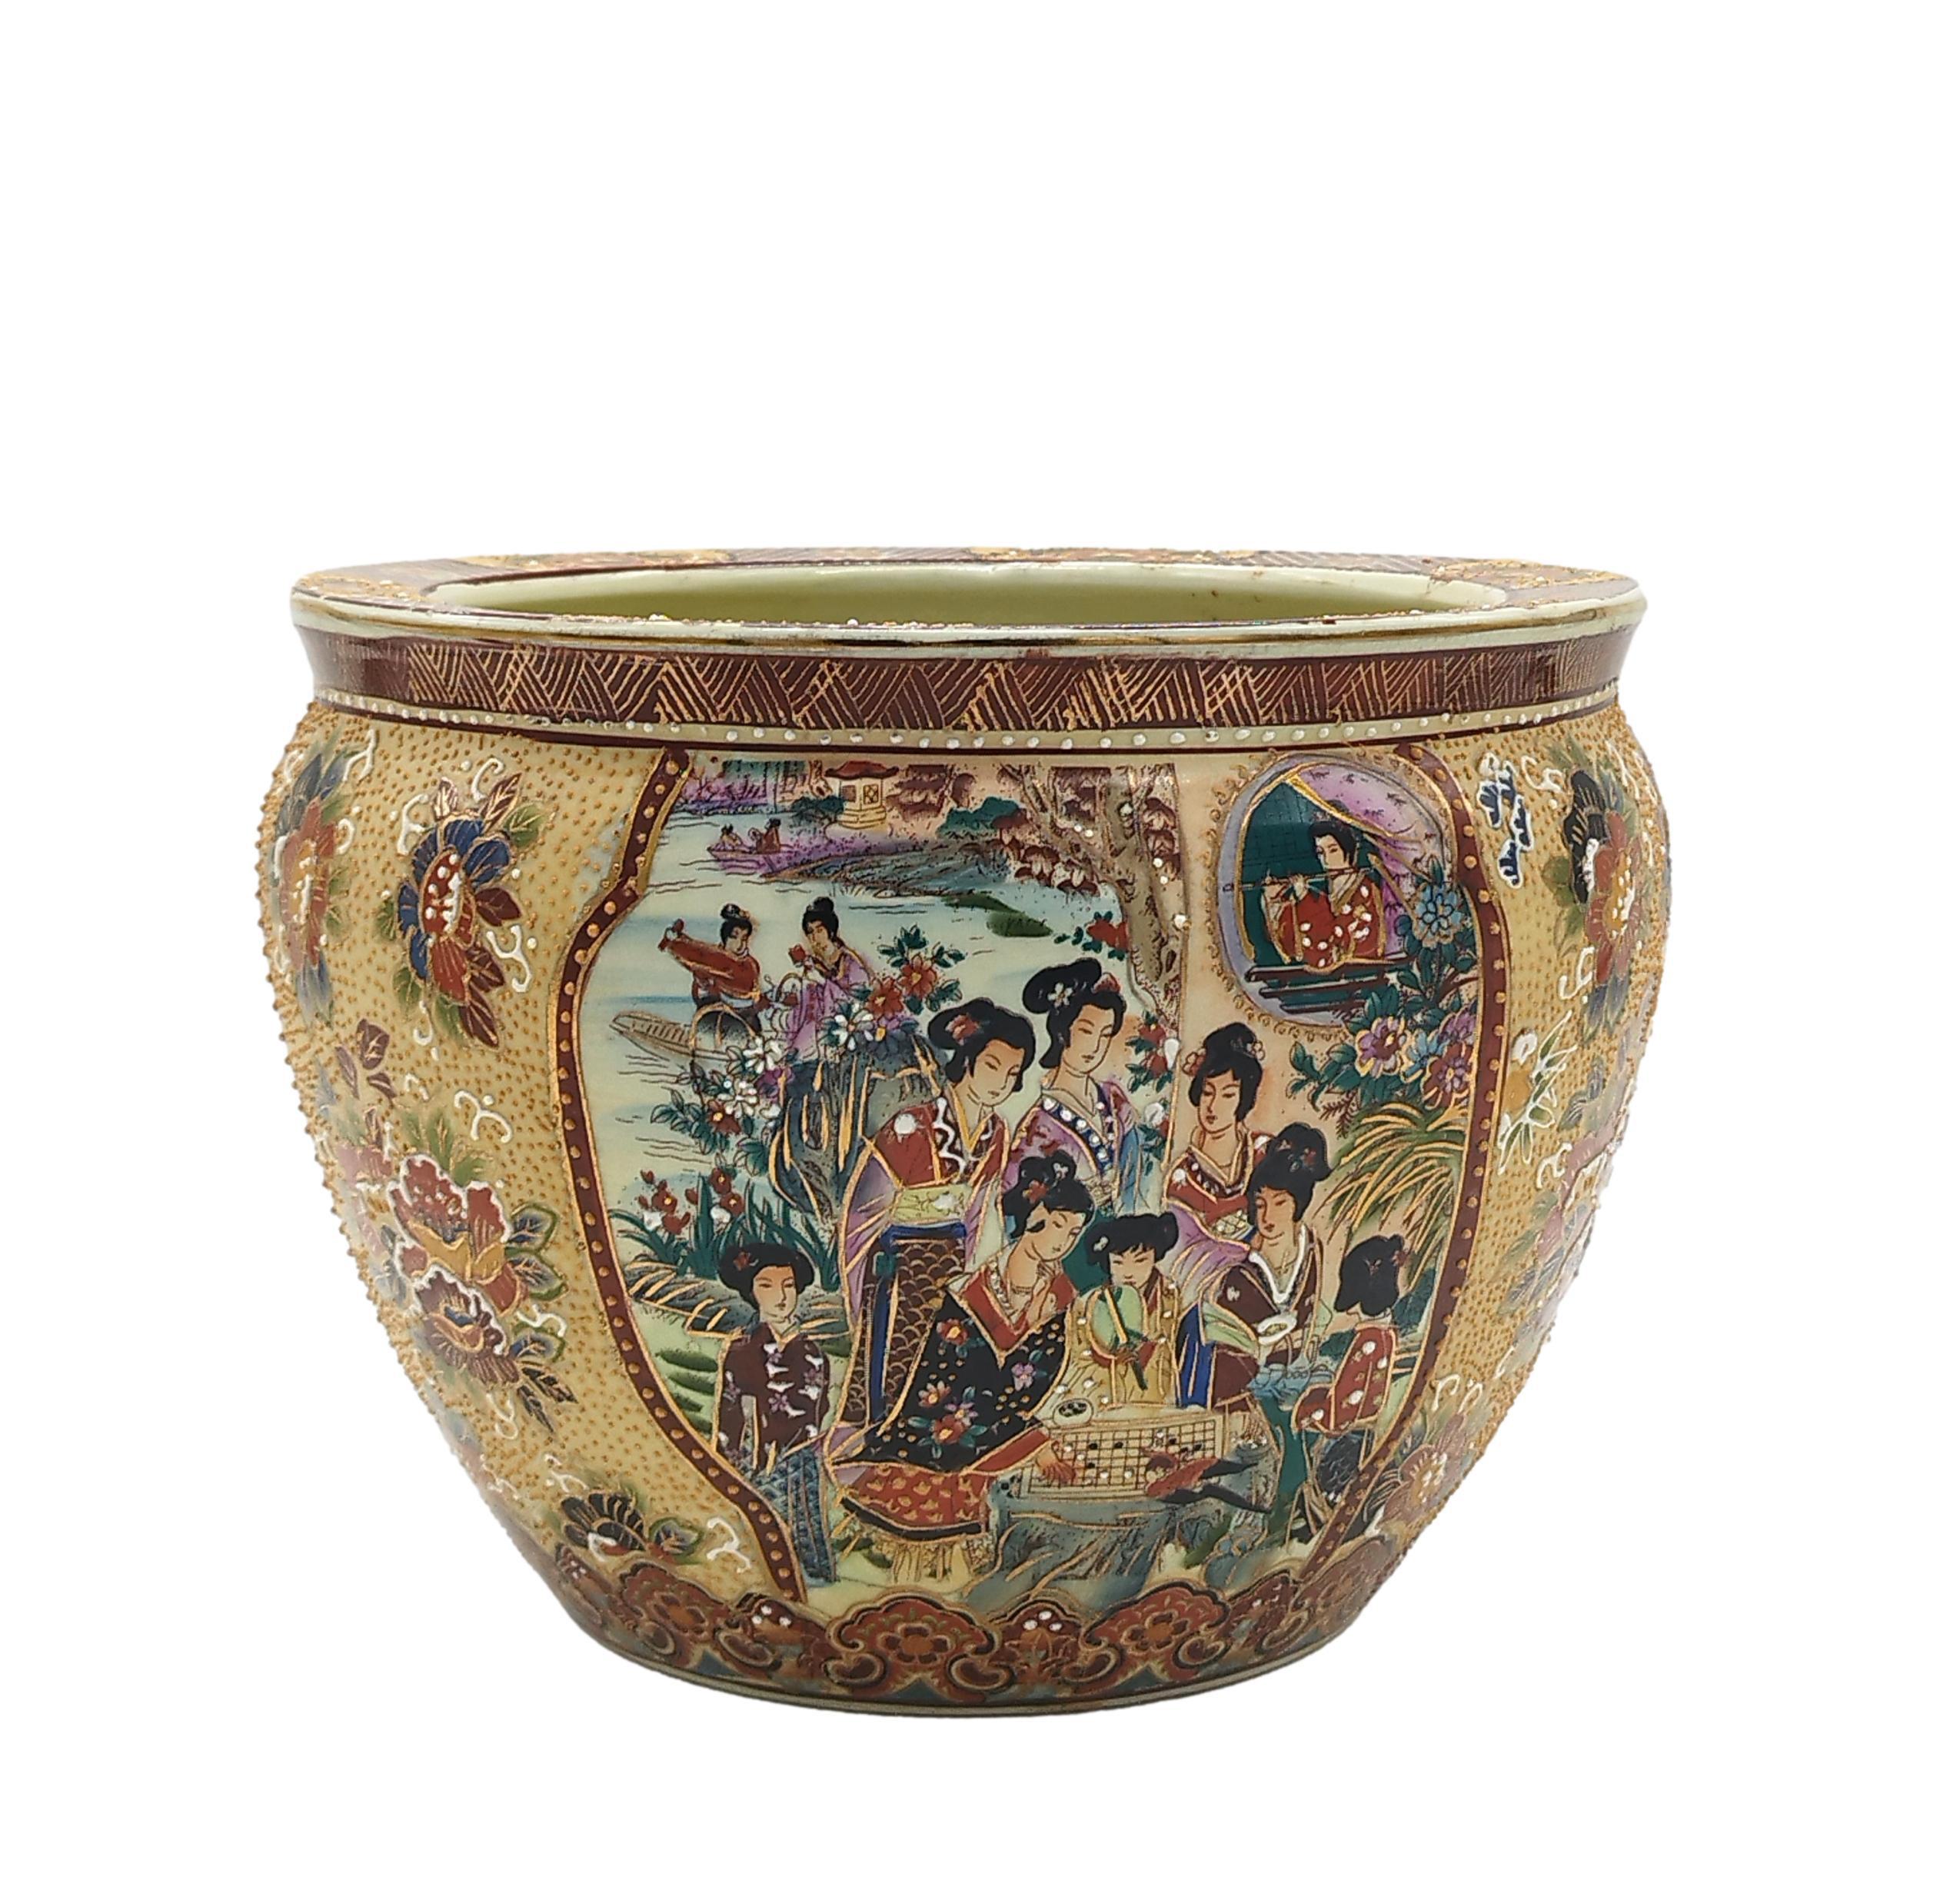 Hand-painted Chinese porcelain garden vase or fish bowl depicting Chinese women in Kimonos, nature and flowers. The interior, also painted, depicts fish and seaweed.